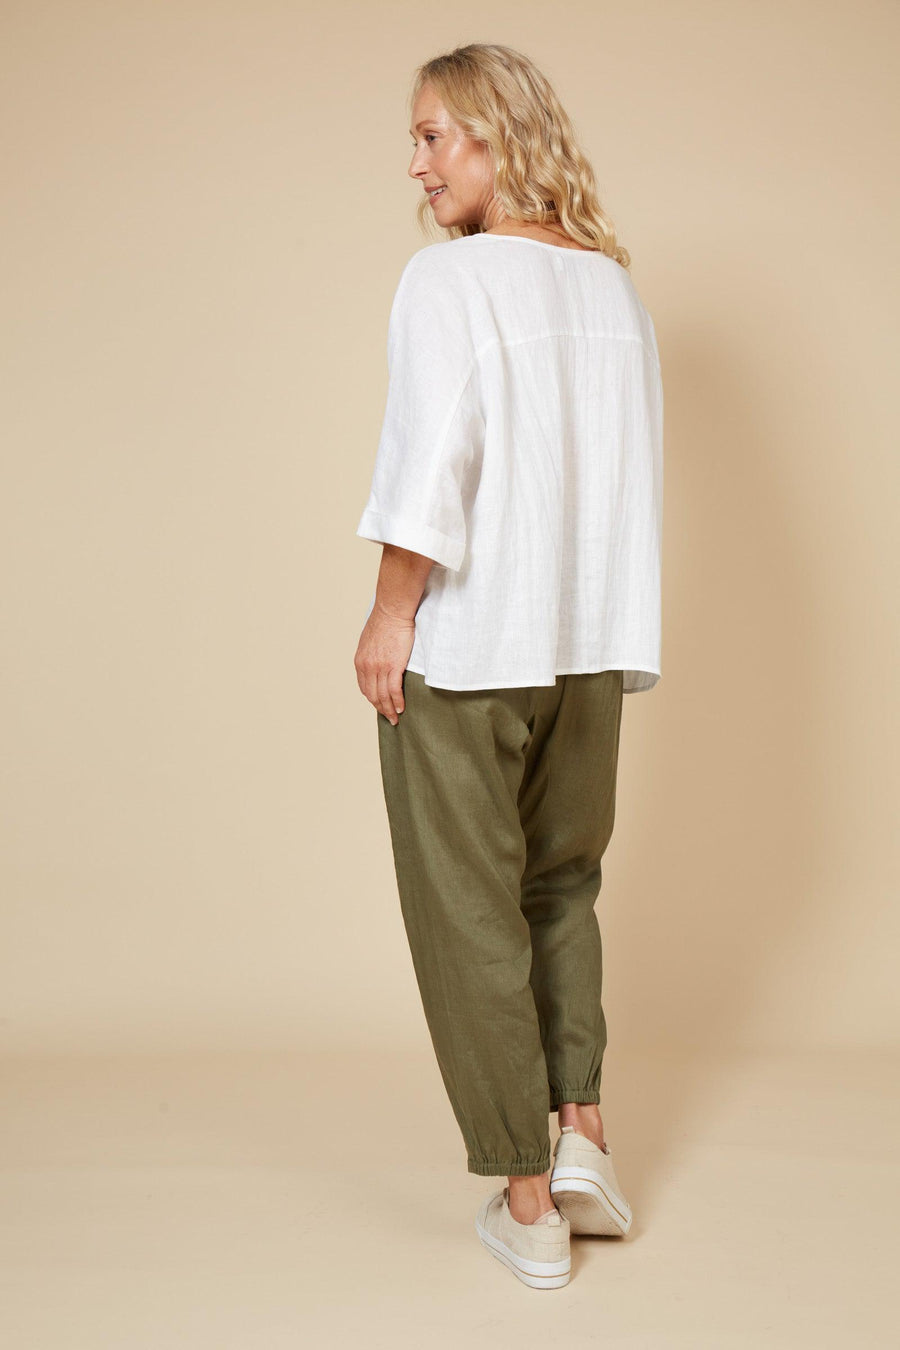 Eb & Ive Studio Relaxed Top 100% Linen